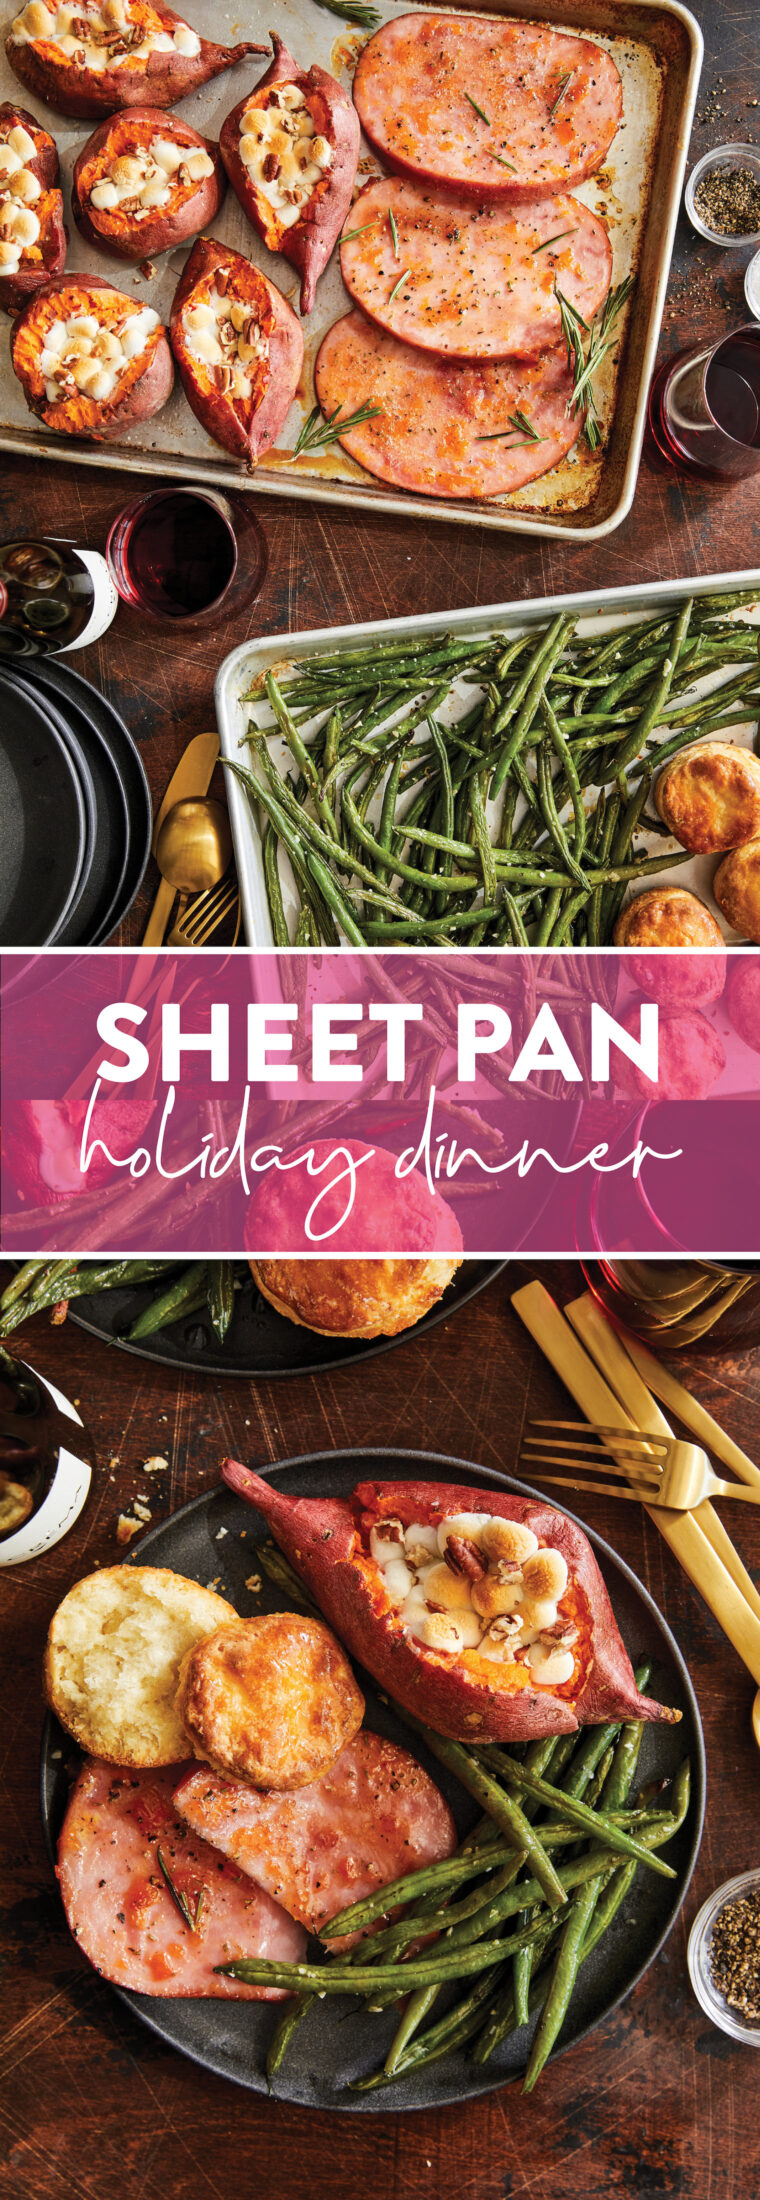 Sheet Pan Holiday Dinner - The easiest ham dinner ever (sides included!). And everything is baked on 2 sheet pans in 45 min, start to finish!